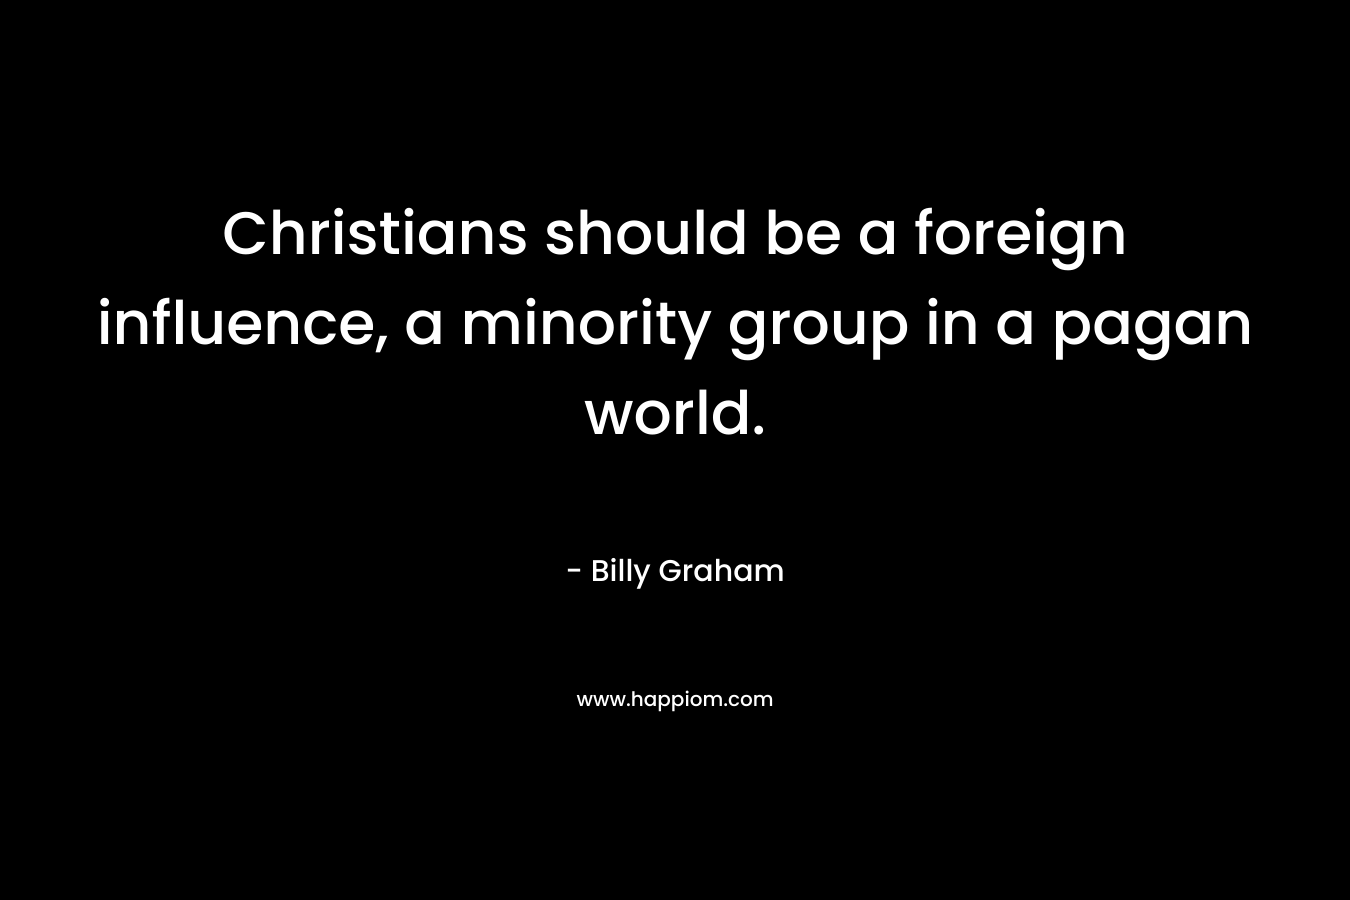 Christians should be a foreign influence, a minority group in a pagan world.